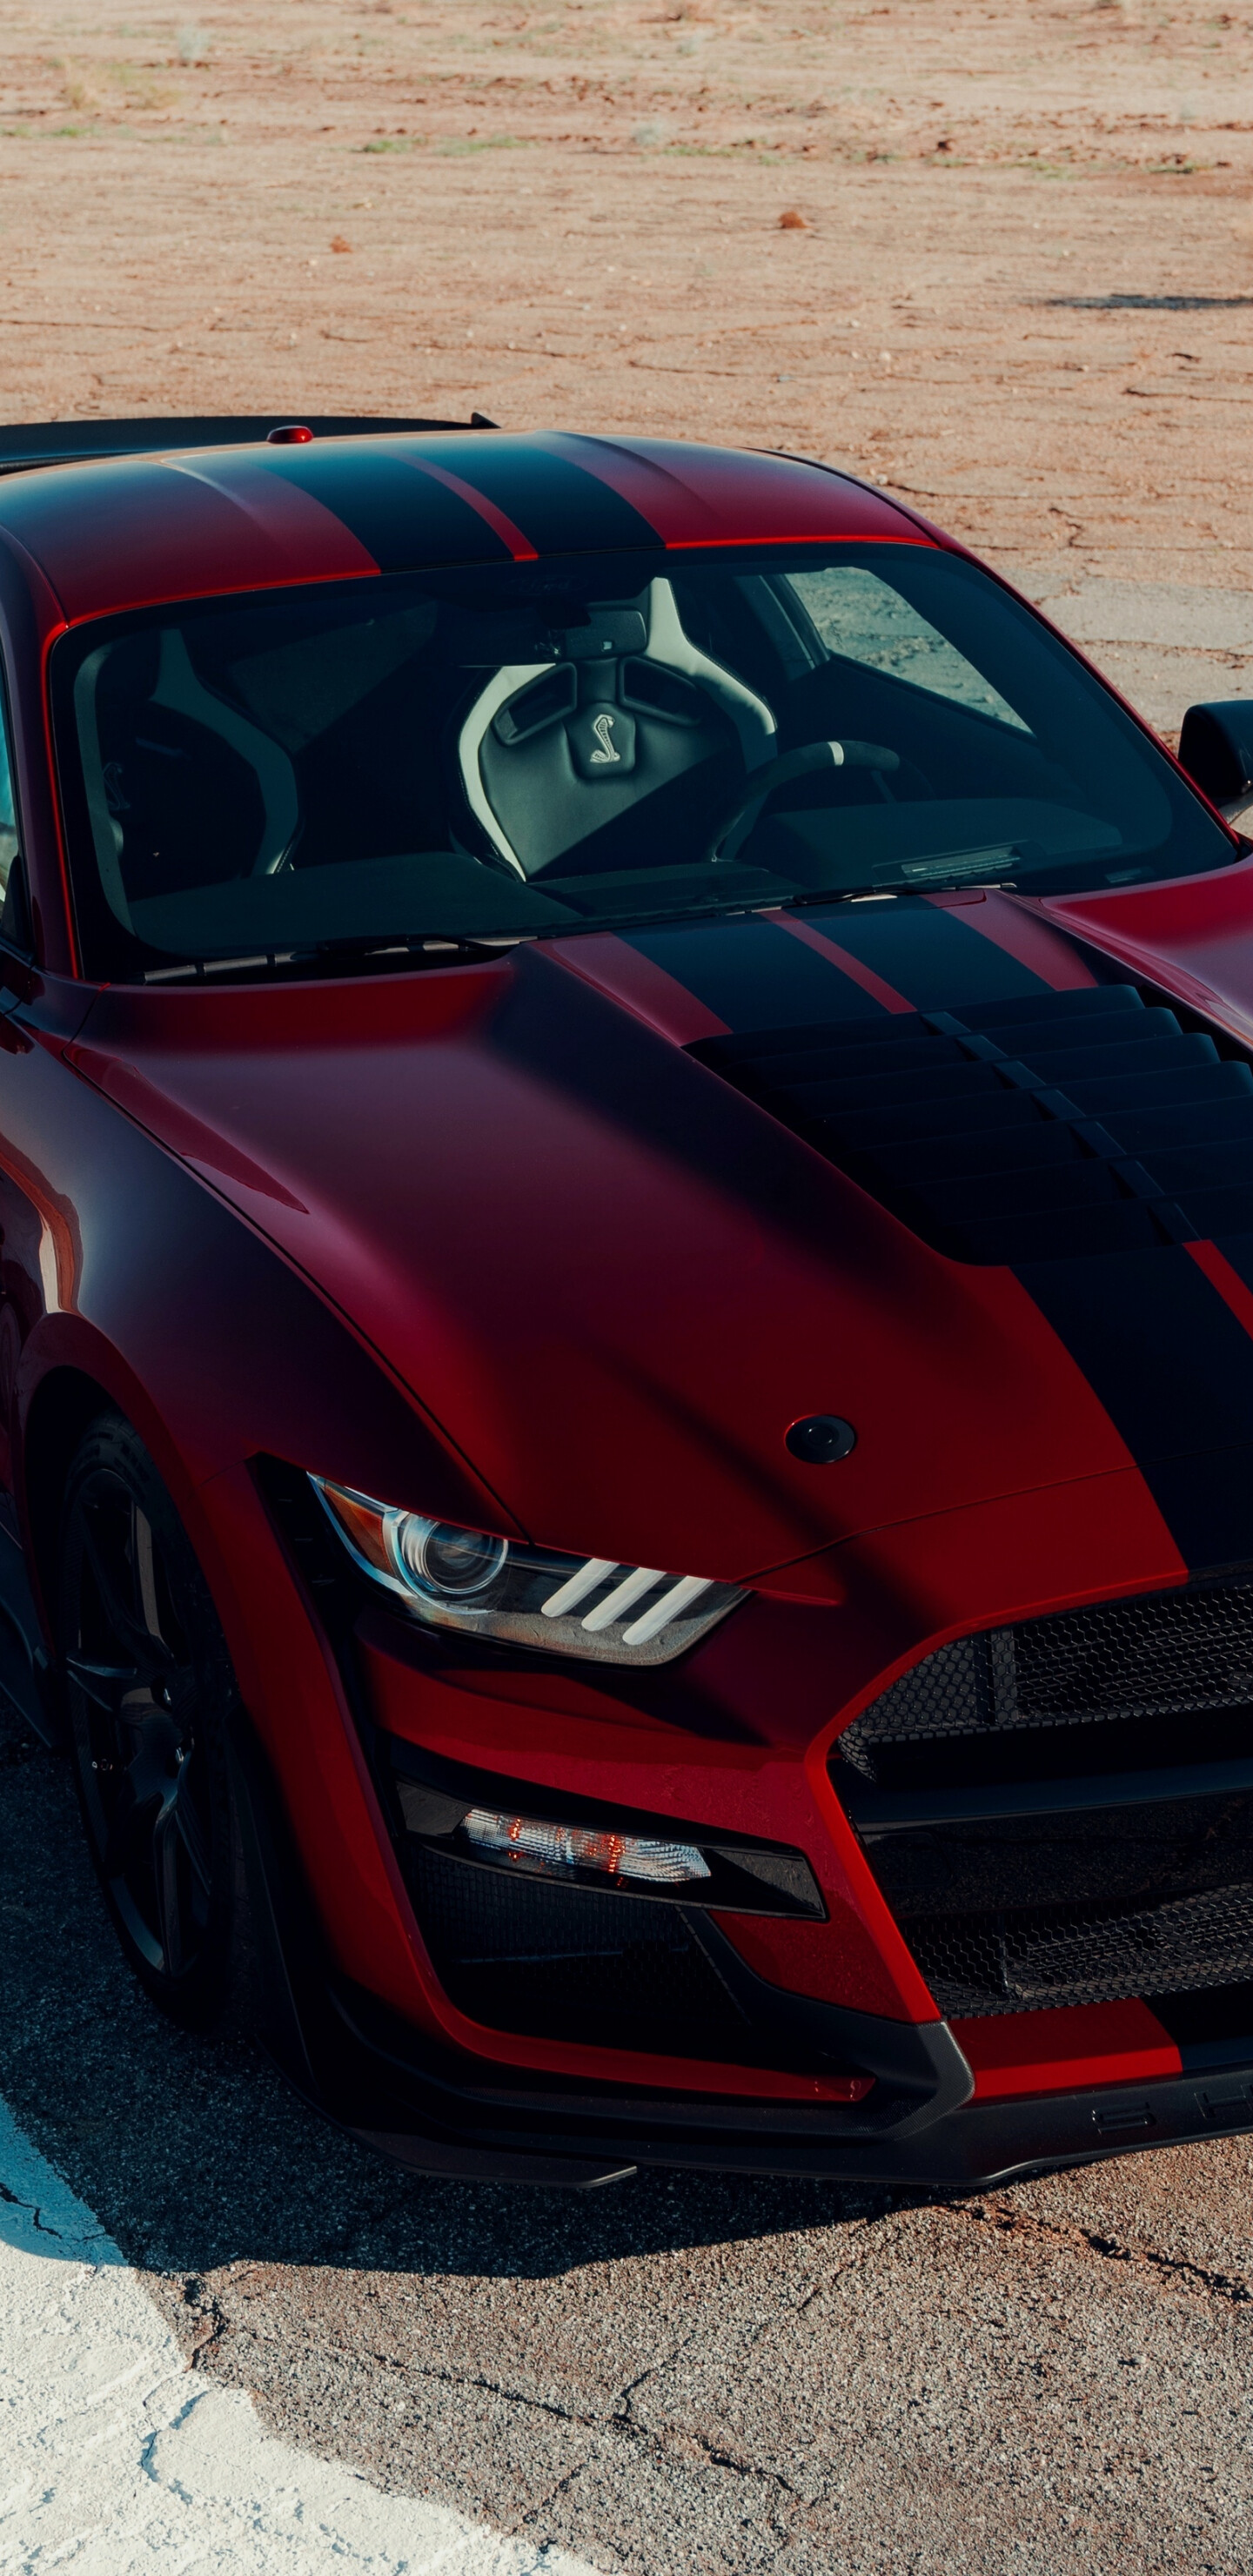 Ford: Mustang Shelby GT500, Muscle car, The world's best-selling sports car since its release in 1964. 1440x2960 HD Wallpaper.